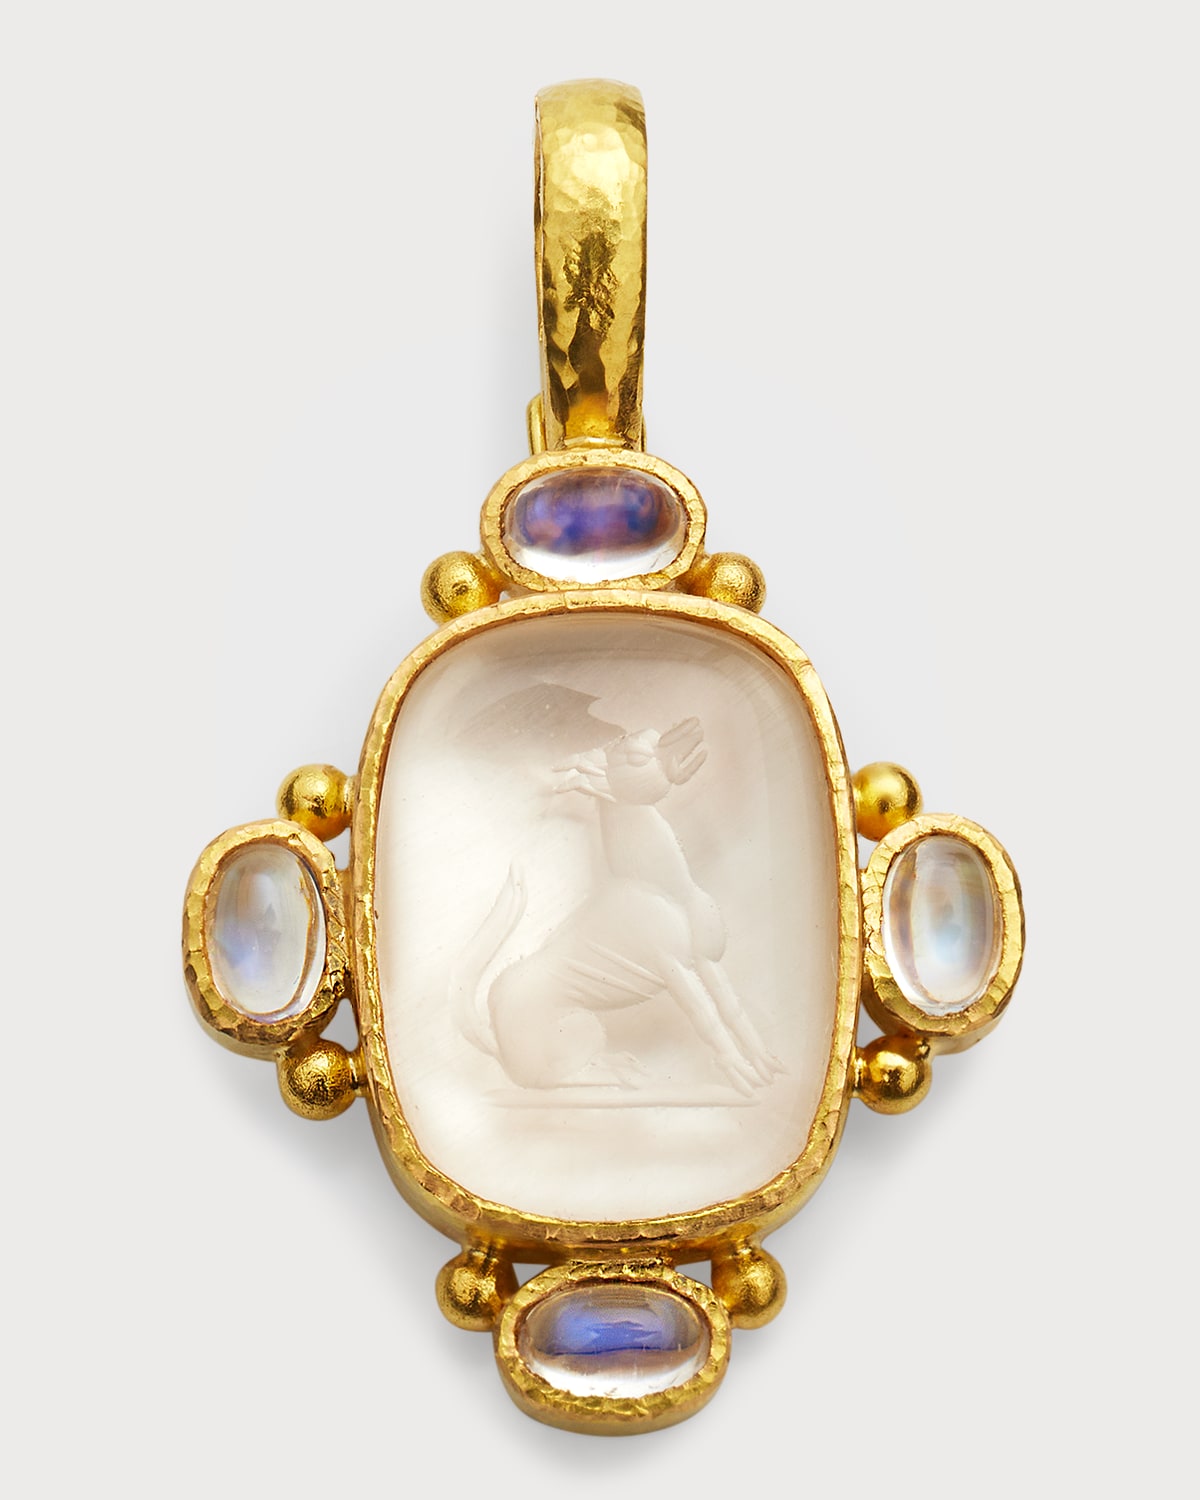 19K Rock Crystal Seated Whippet Cabochon Moonstone Pendant, 32x27mm